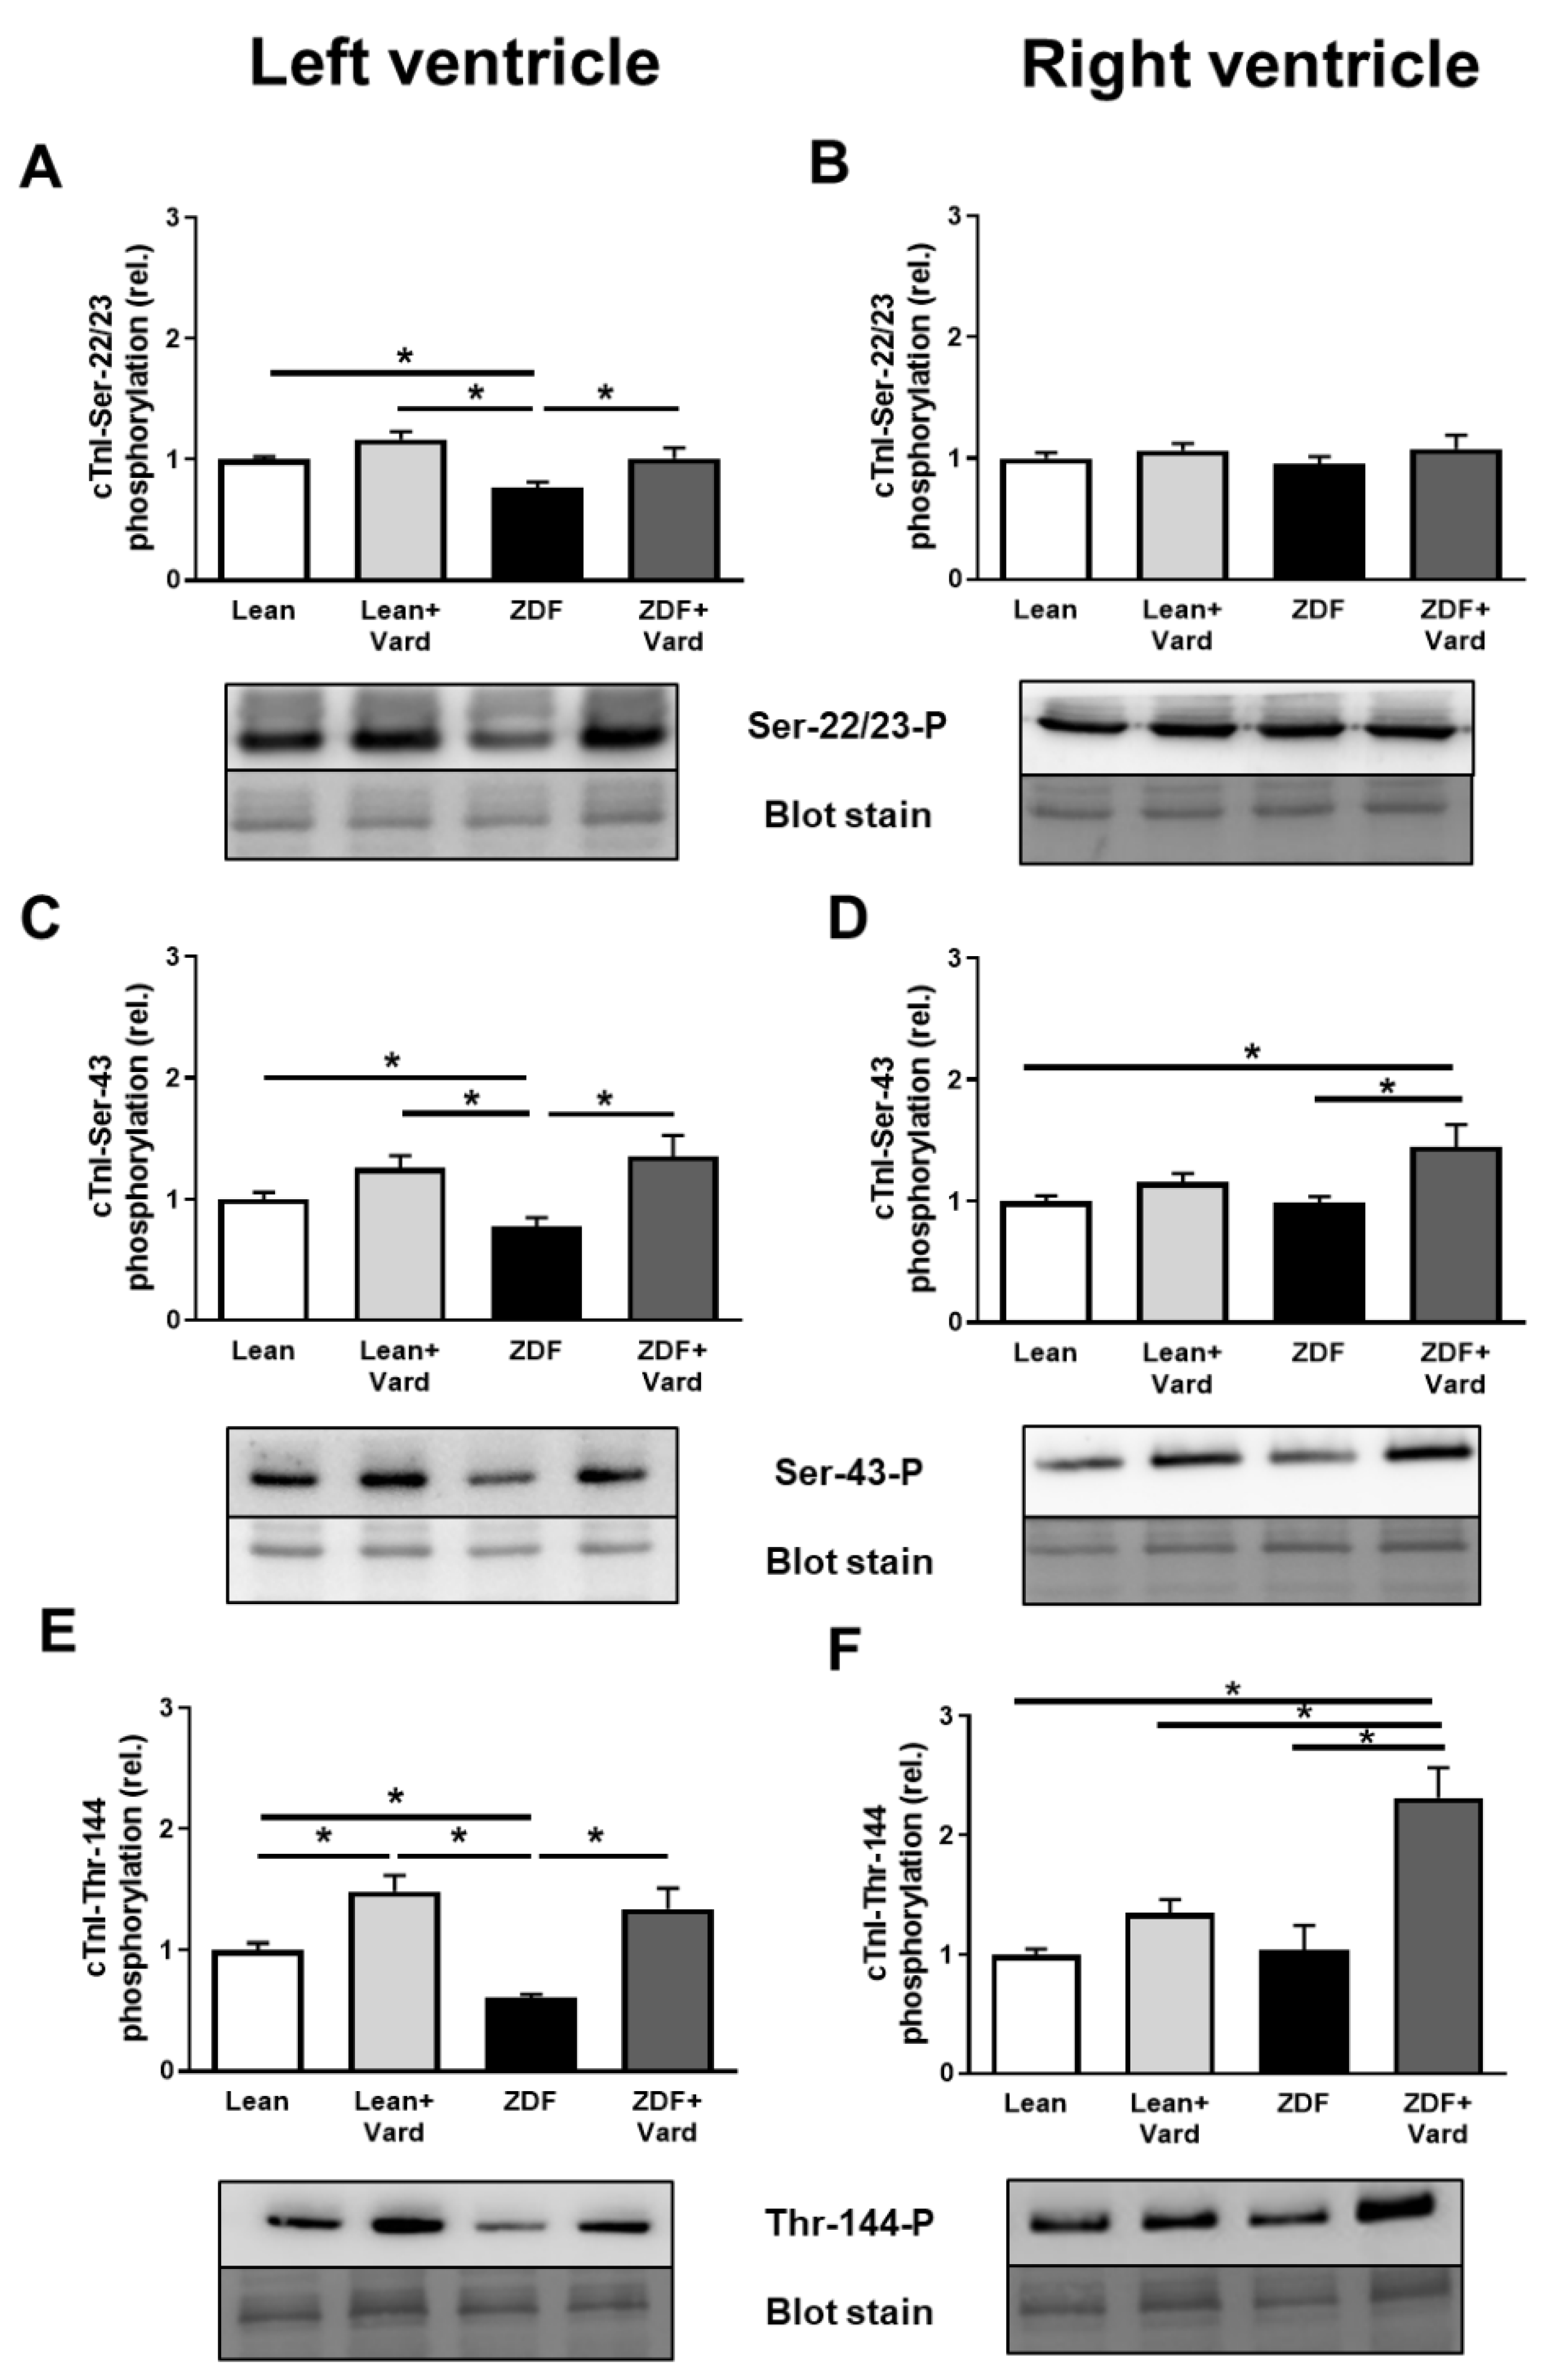 Antioxidants Free Full Text Long Term Pde 5a Inhibition Improves Myofilament Function In Left And Right Ventricular Cardiomyocytes Through Partially Different Mechanisms In Diabetic Rat Hearts Html